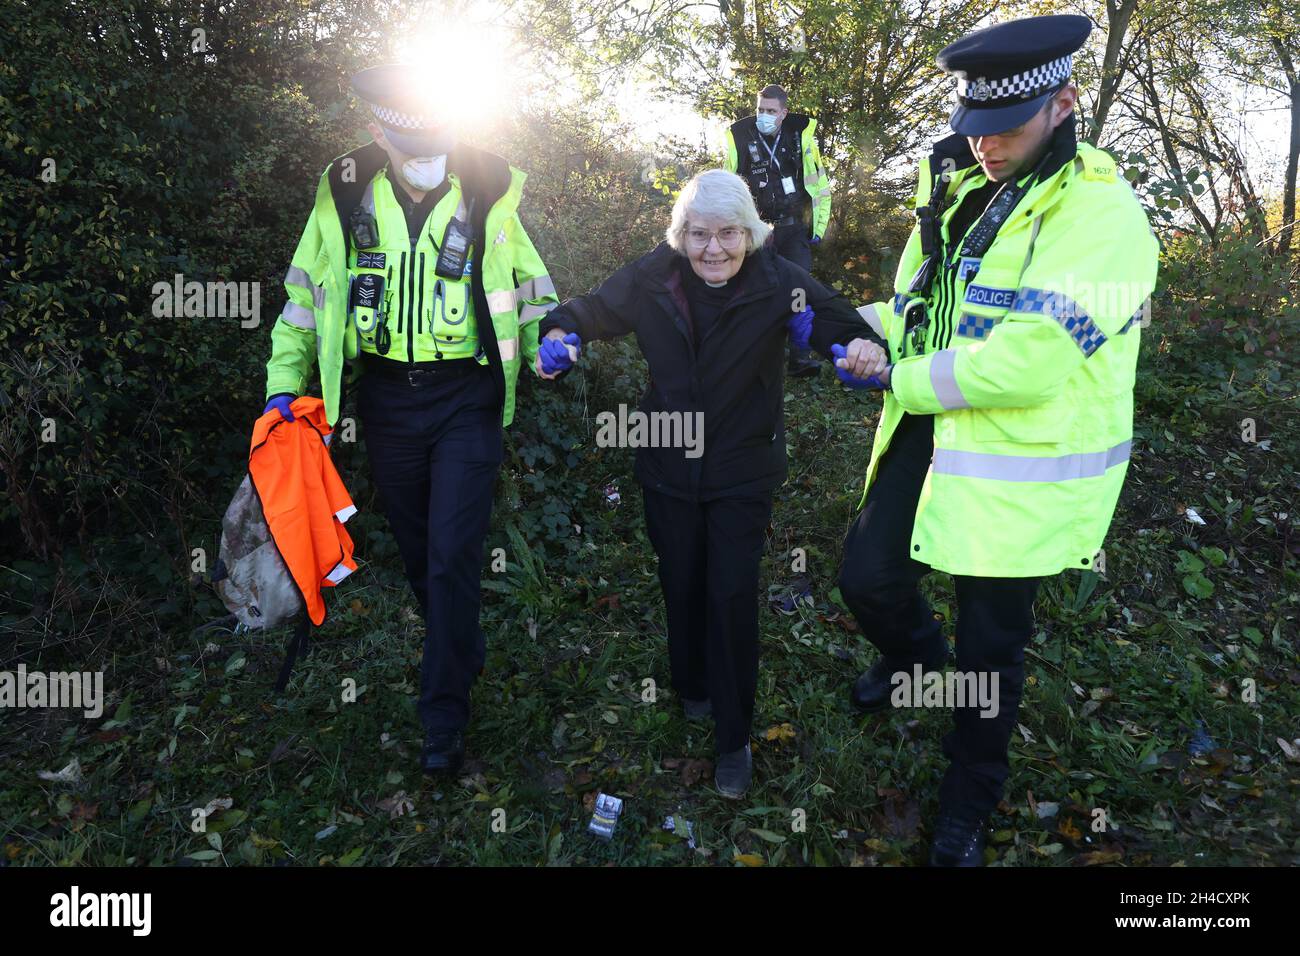 South Mimms, UK. 02nd Nov, 2021. Climate activists from Insulate Britain being arrested after attempting to block traffic on the M25 near junction 23 for the A1. The Climate change protest group have blocked various roads around the capital over a number of weeks, resulting in a court injunction banning them from going near the M25 motorway. Photo credit: Ben Cawthra/Sipa USA **NO UK SALES** Credit: Sipa USA/Alamy Live News Stock Photo